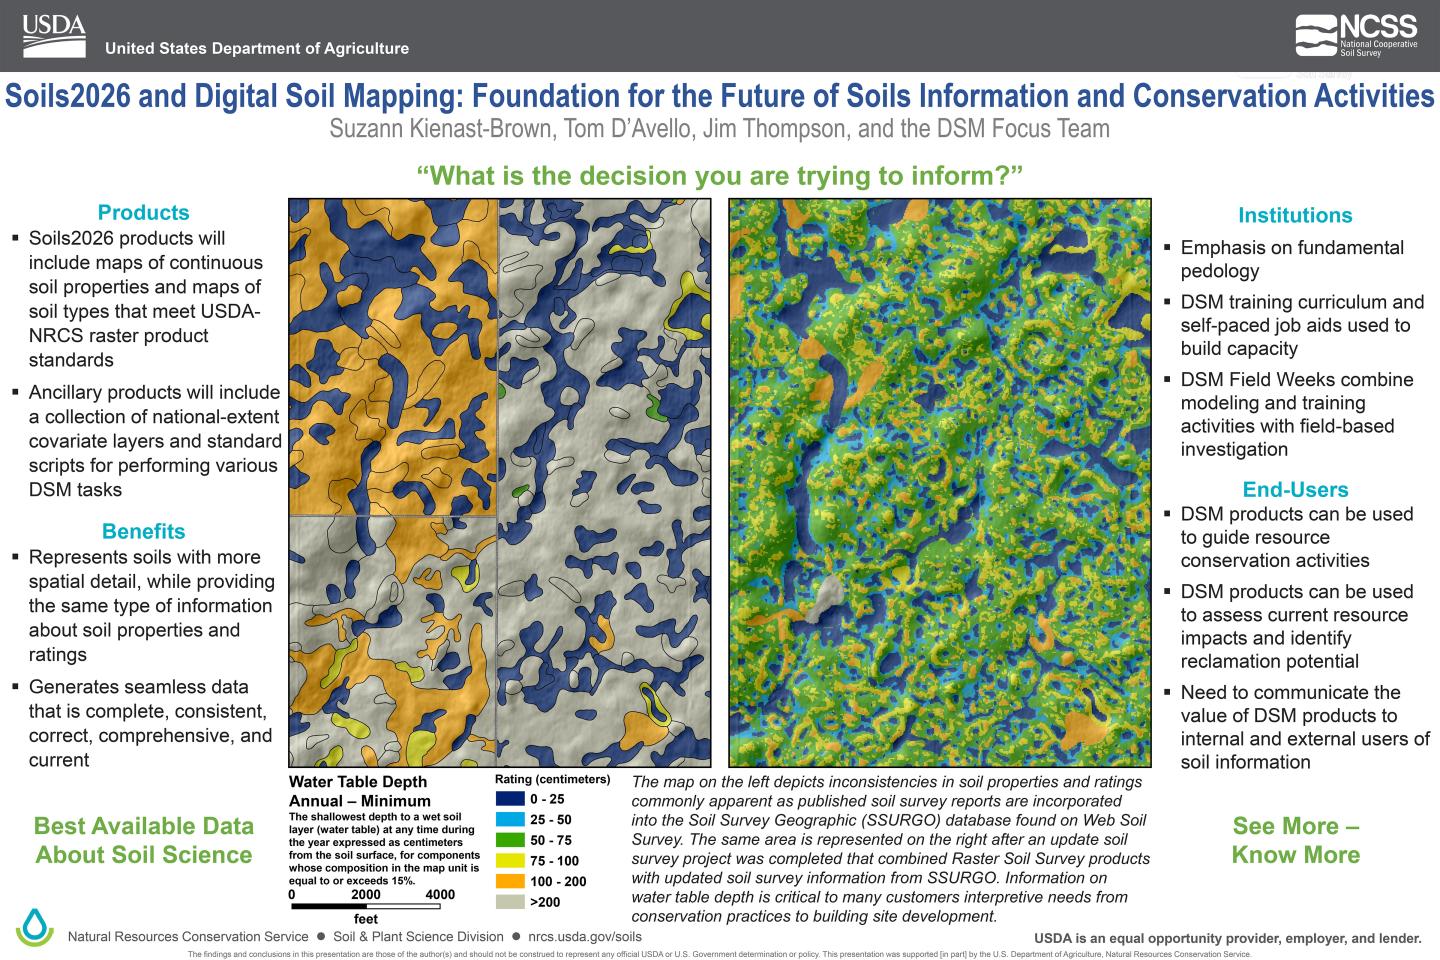 Soils 2026 and Digital Soil Mapping: Foundation for the Future of Soils Information and Conservation Activities